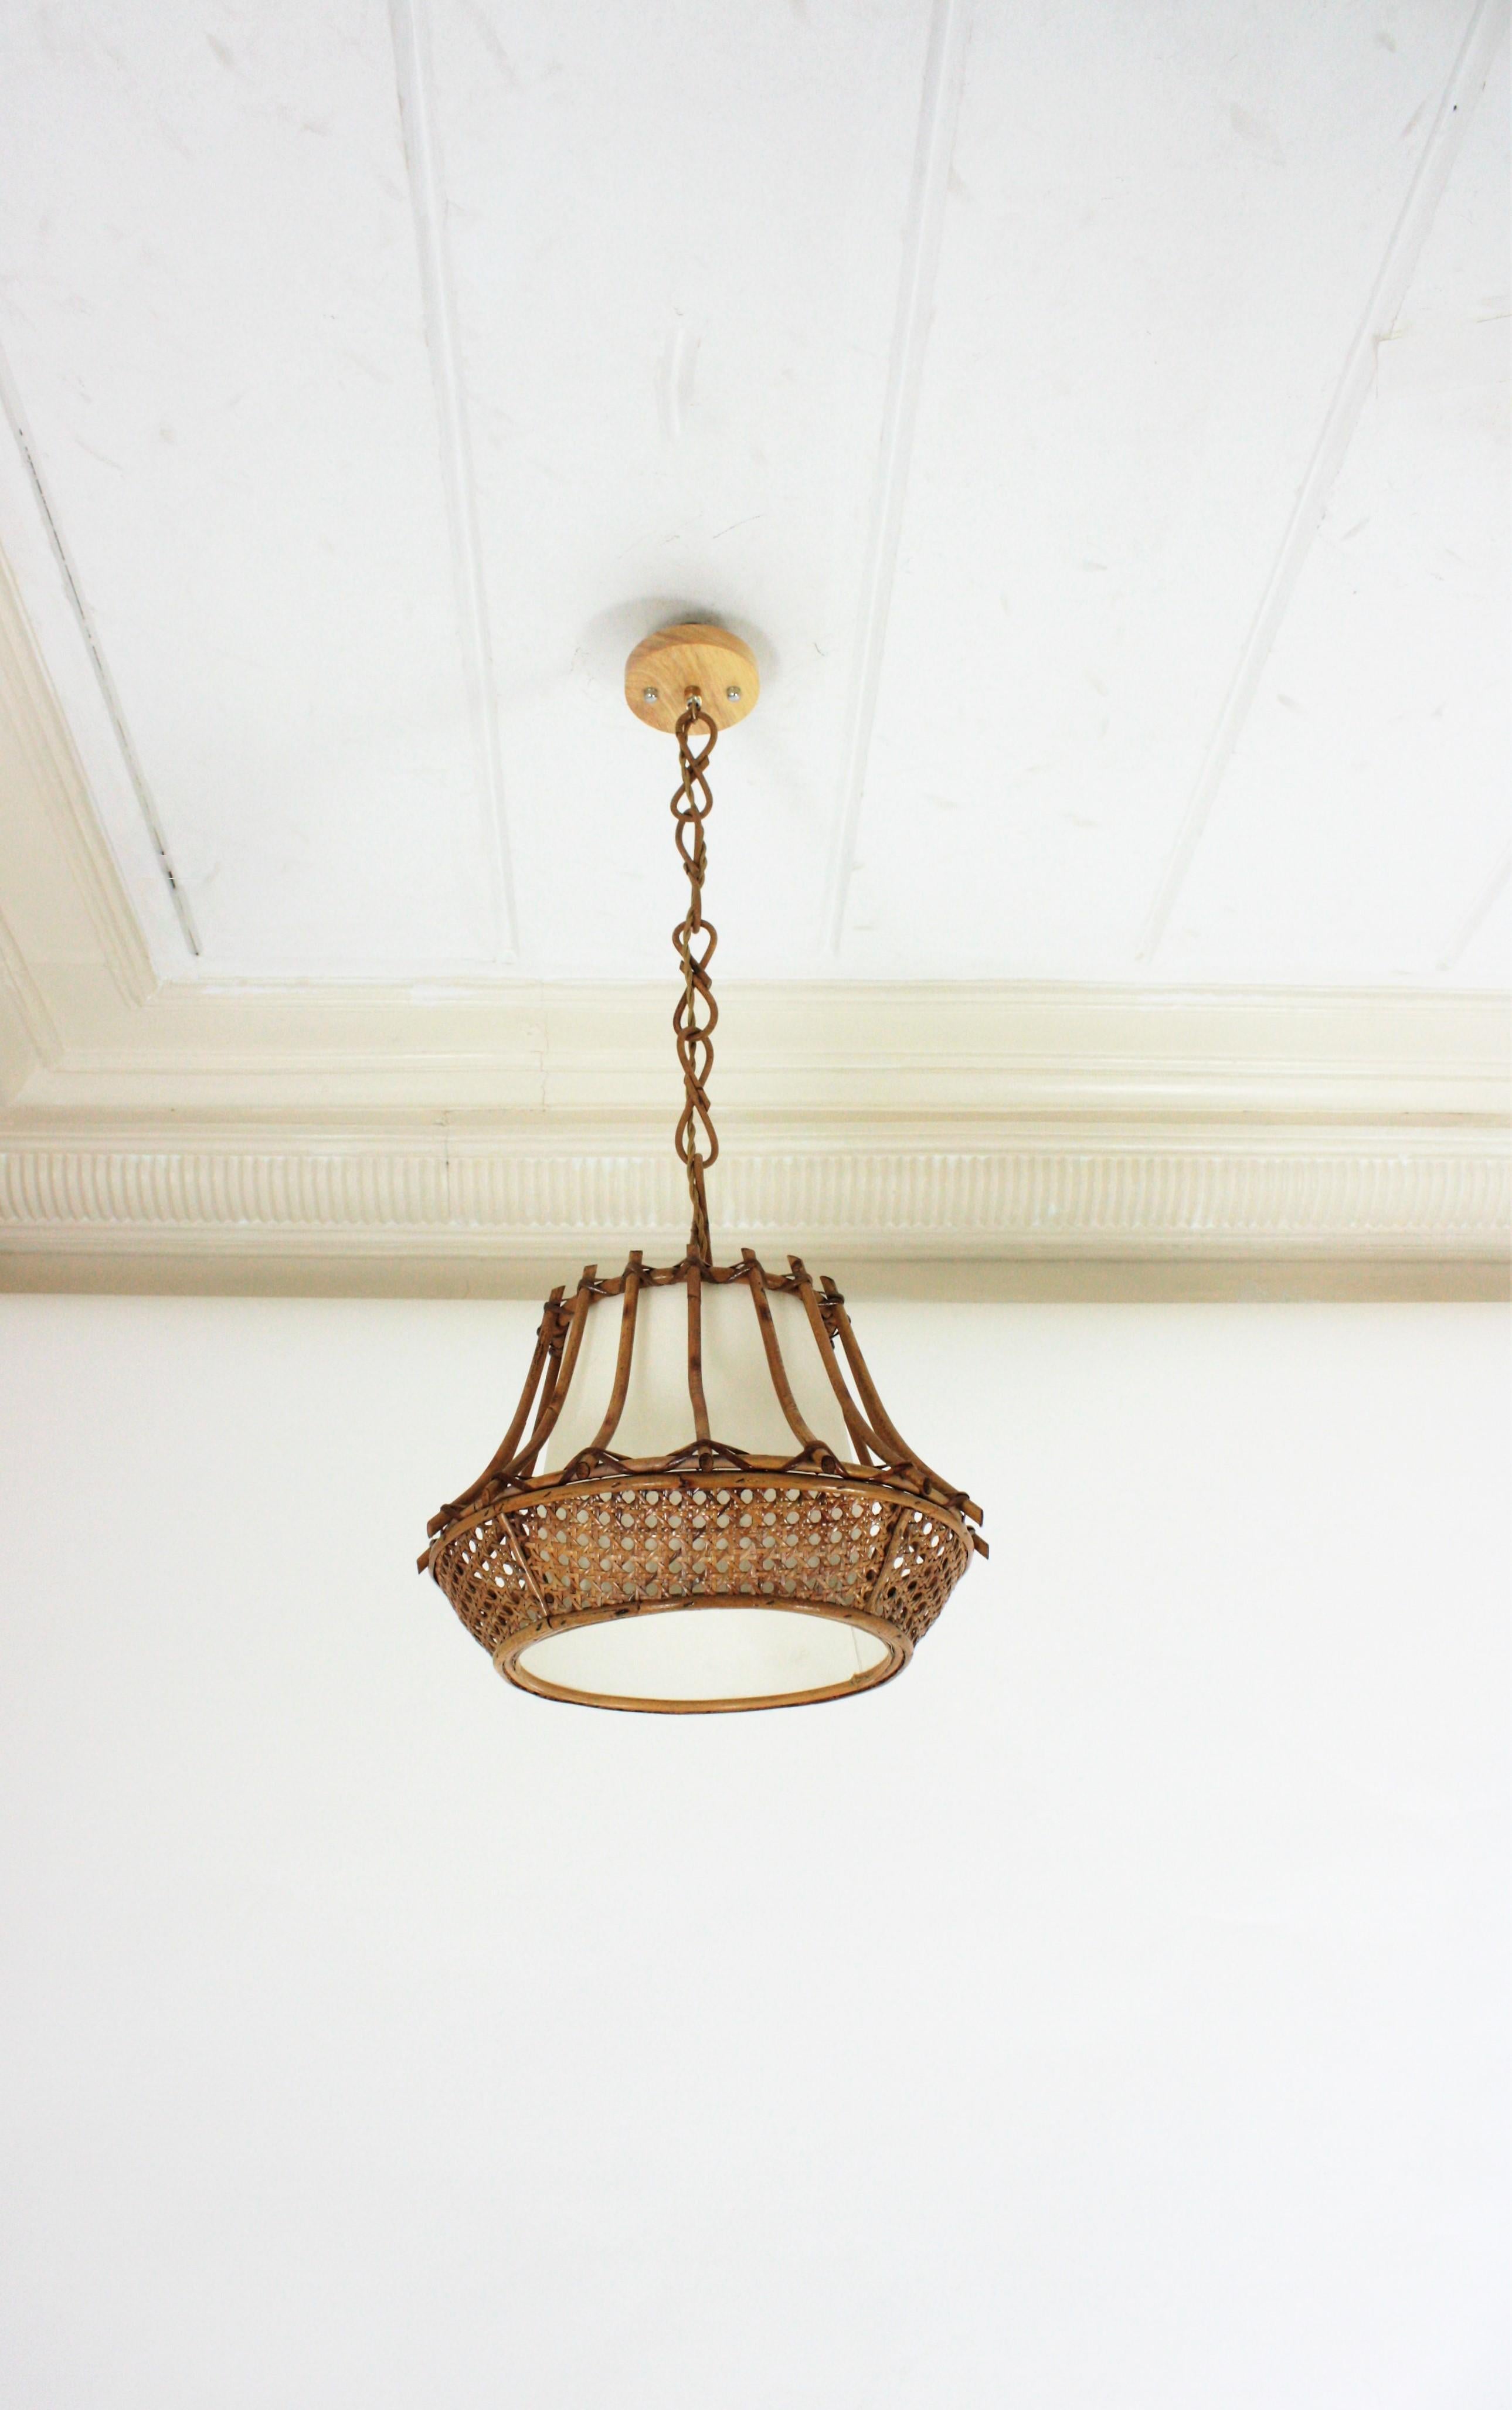 Rattan Wicker Pagoda Pendant Light or Lantern, 1960s In Good Condition For Sale In Barcelona, ES